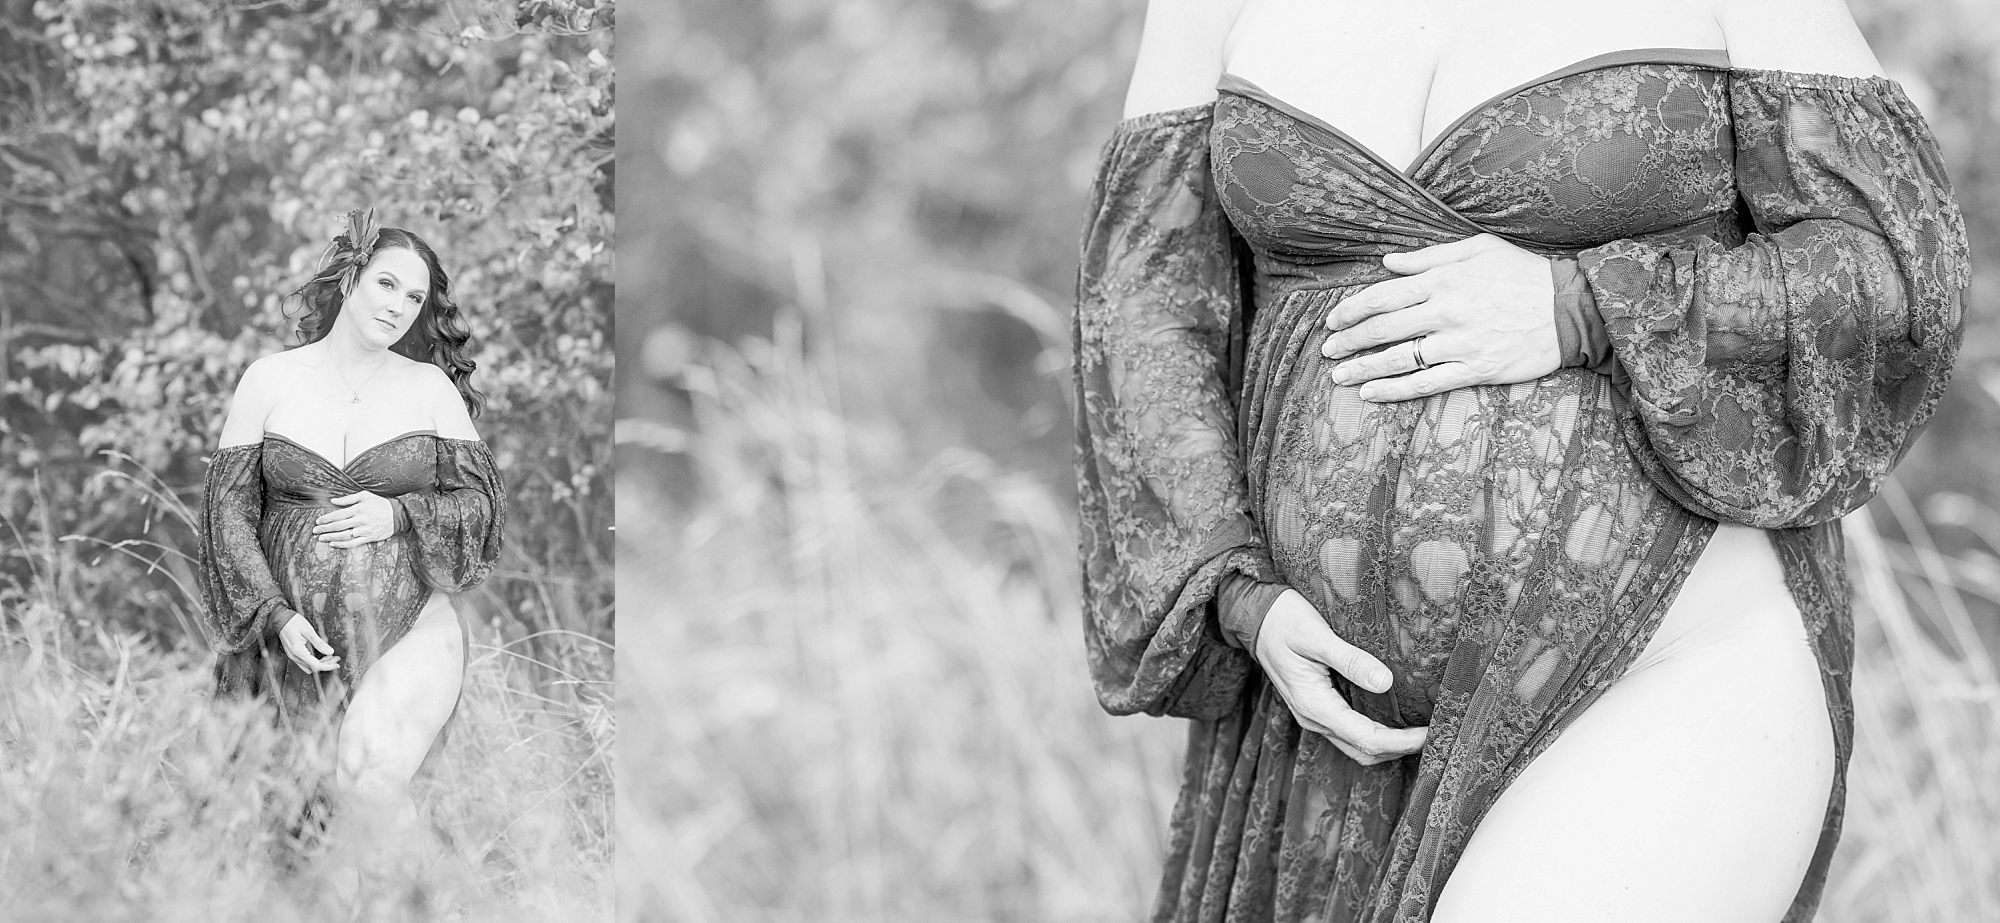 black and white intimate maternity photography session outdoors